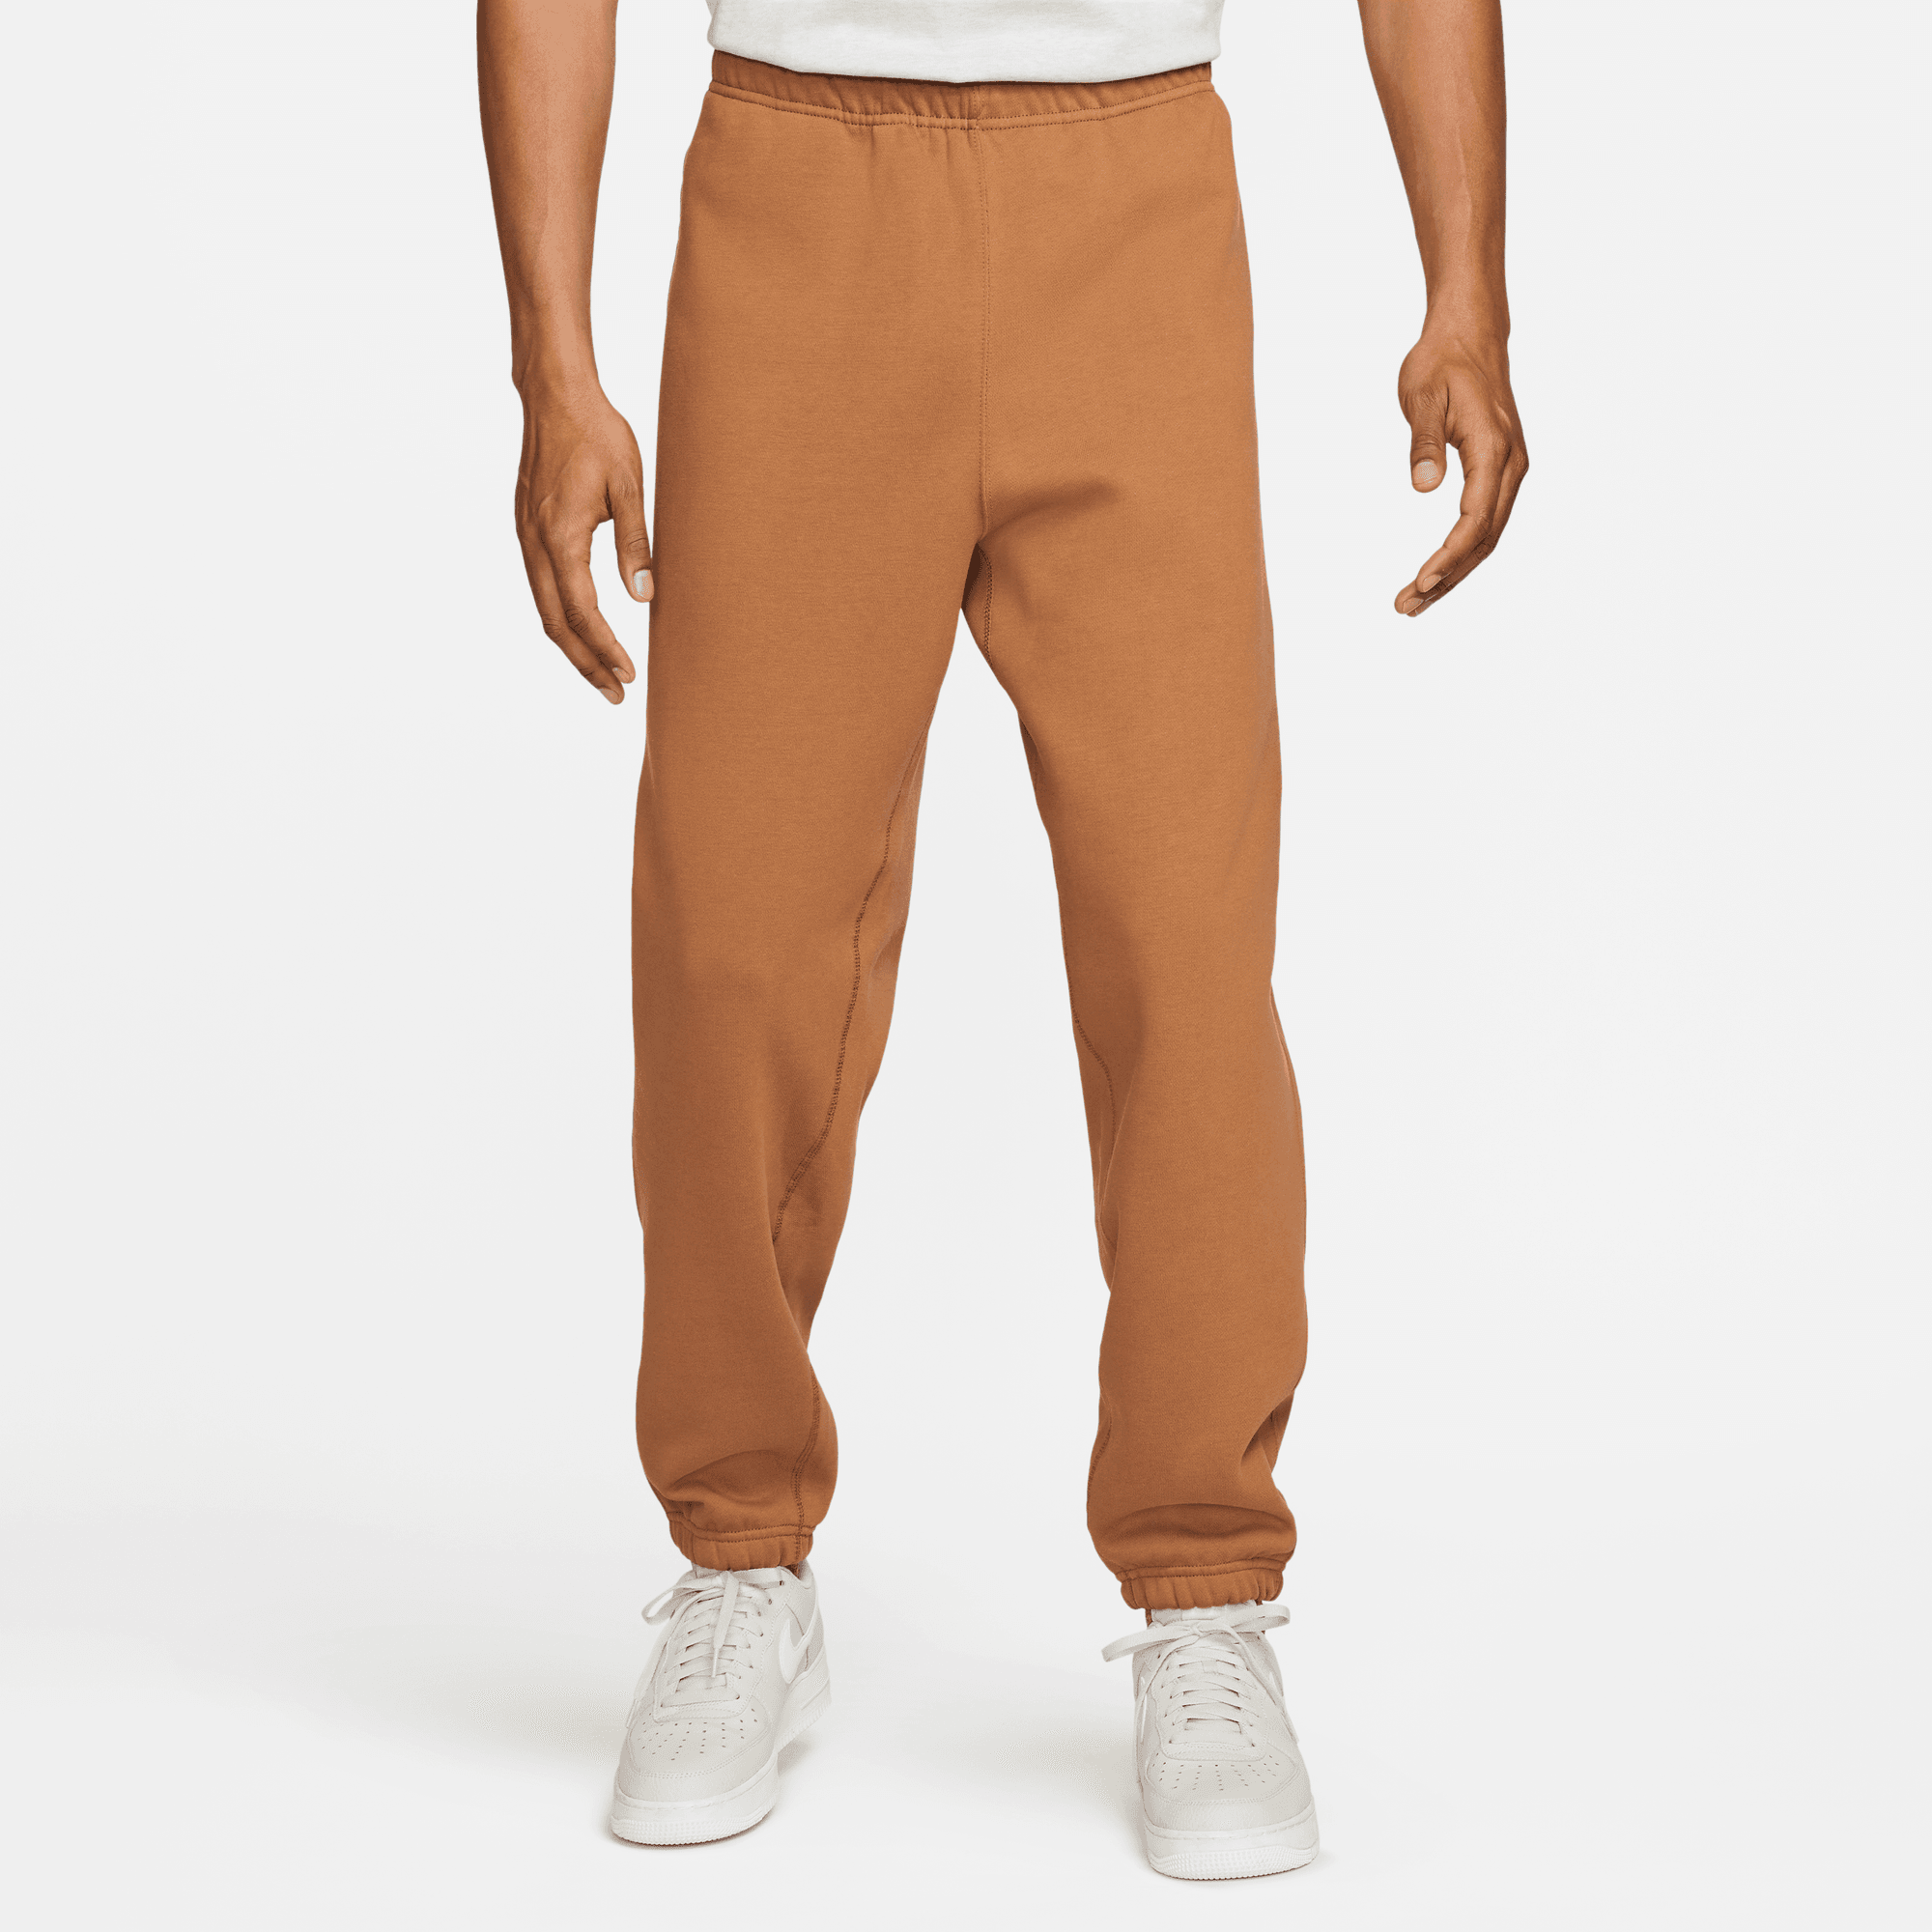 Soloswoosh Pant - Ale Brown/White